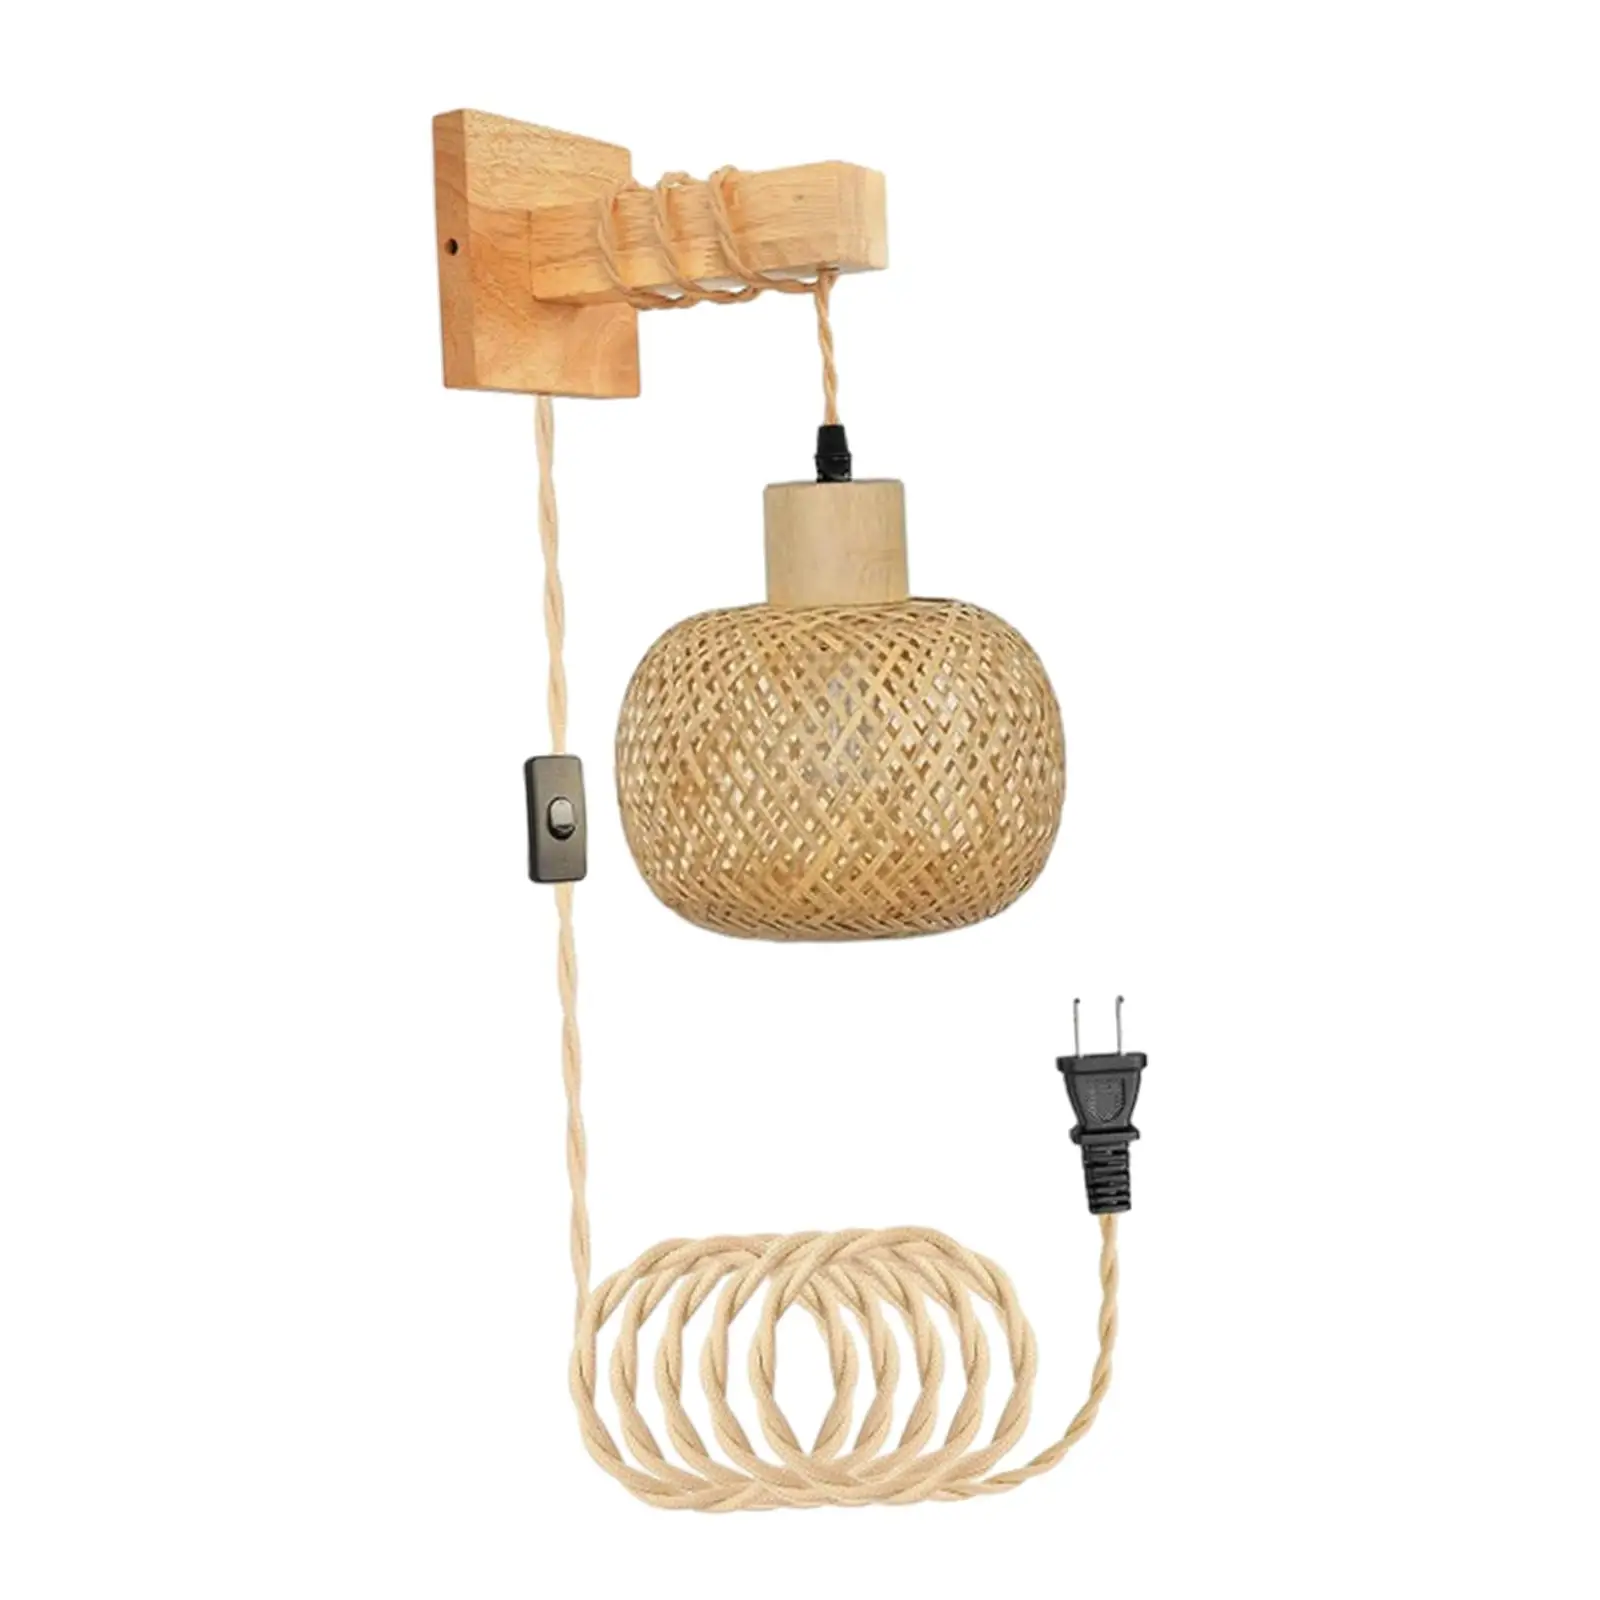 Wall Sconce Decorative Wall Mount Sconce Plug in Pendant Light Bamboo Bedside Wall Lamp for Home Kitchen Hallway Bedroom Reading